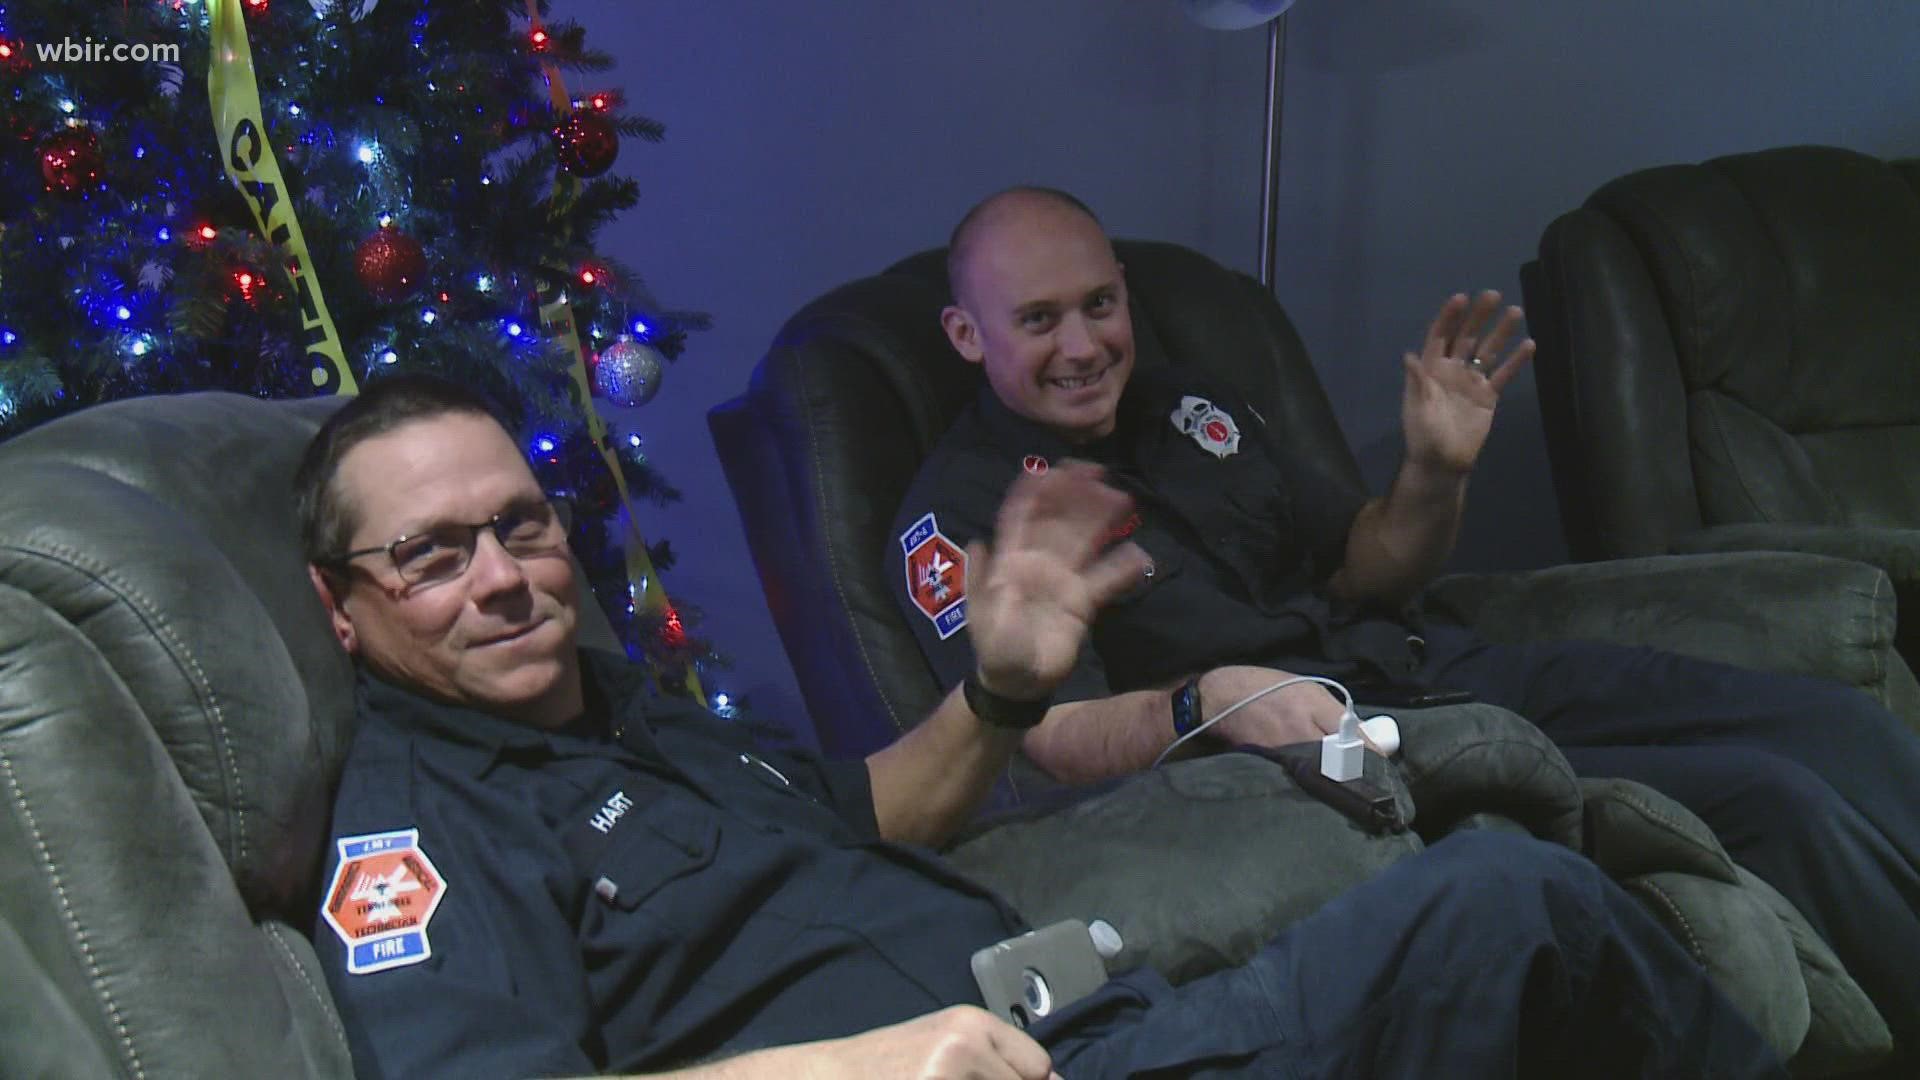 While people across East Tennessee chow down with friends and family, some first responders work through the holiday.